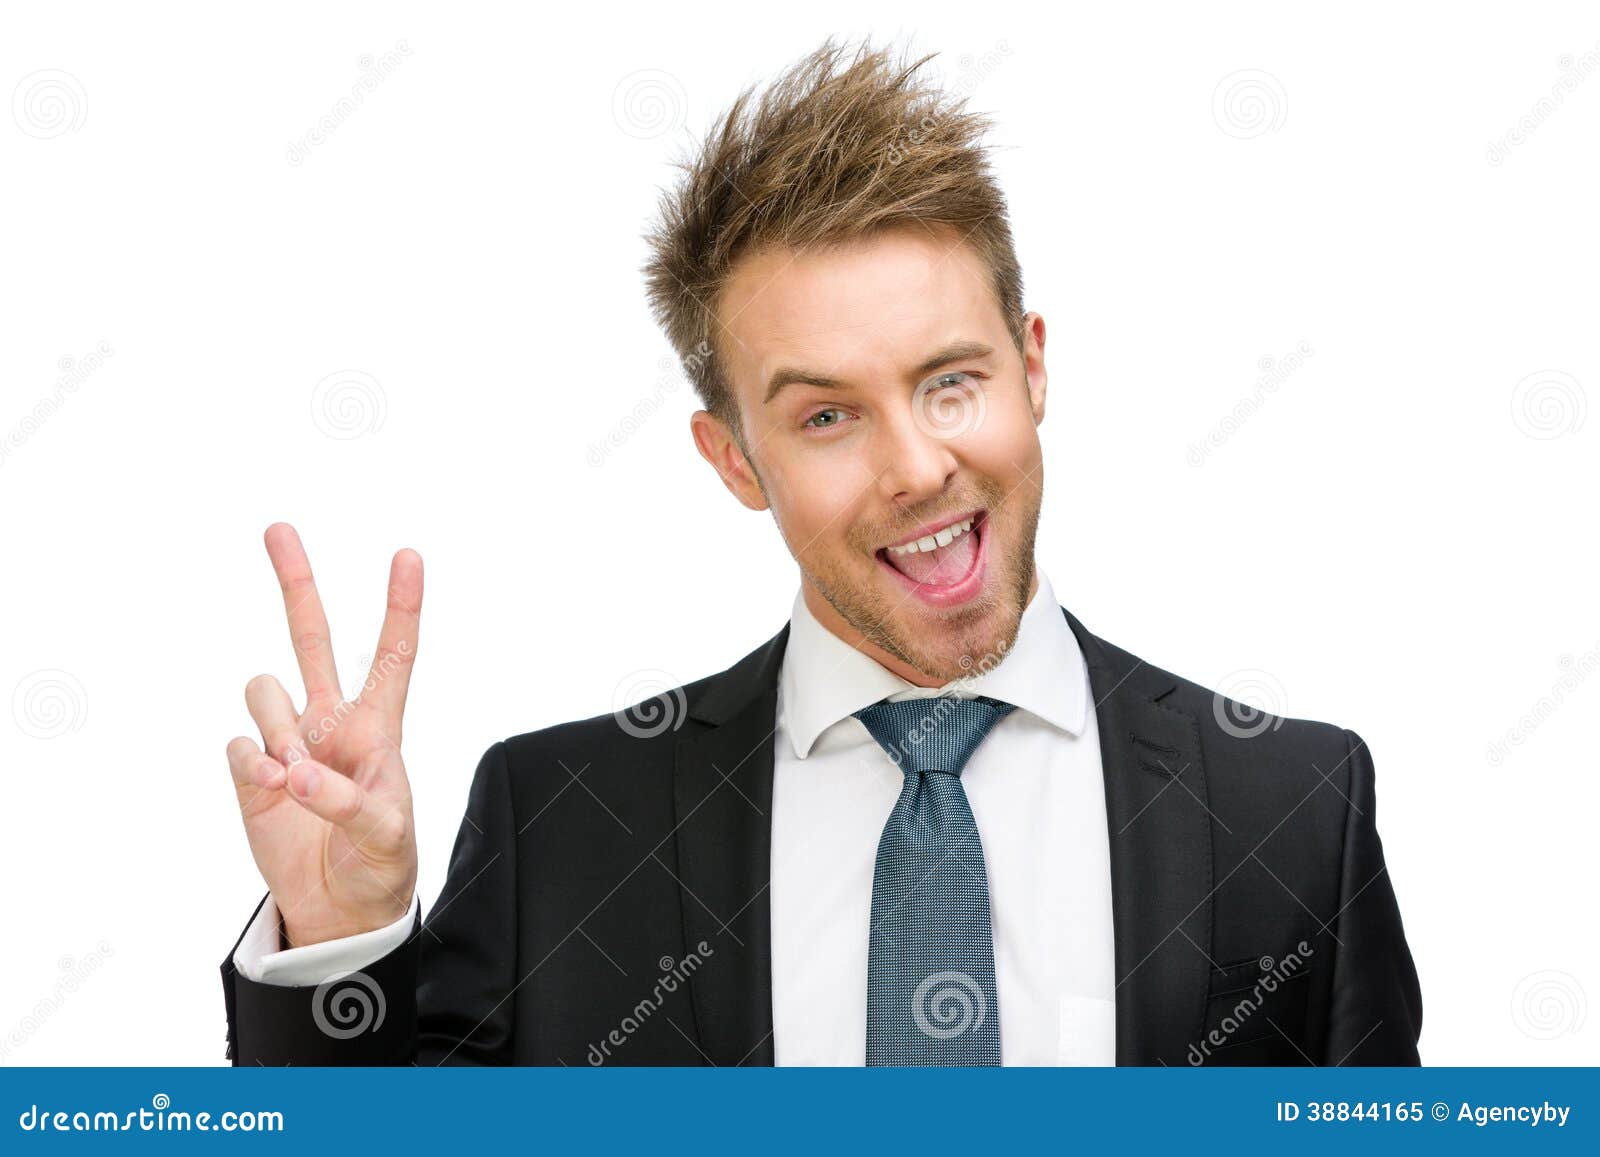 Portrait of Peace Gesturing Manager Stock Image - Image of horizontal ...